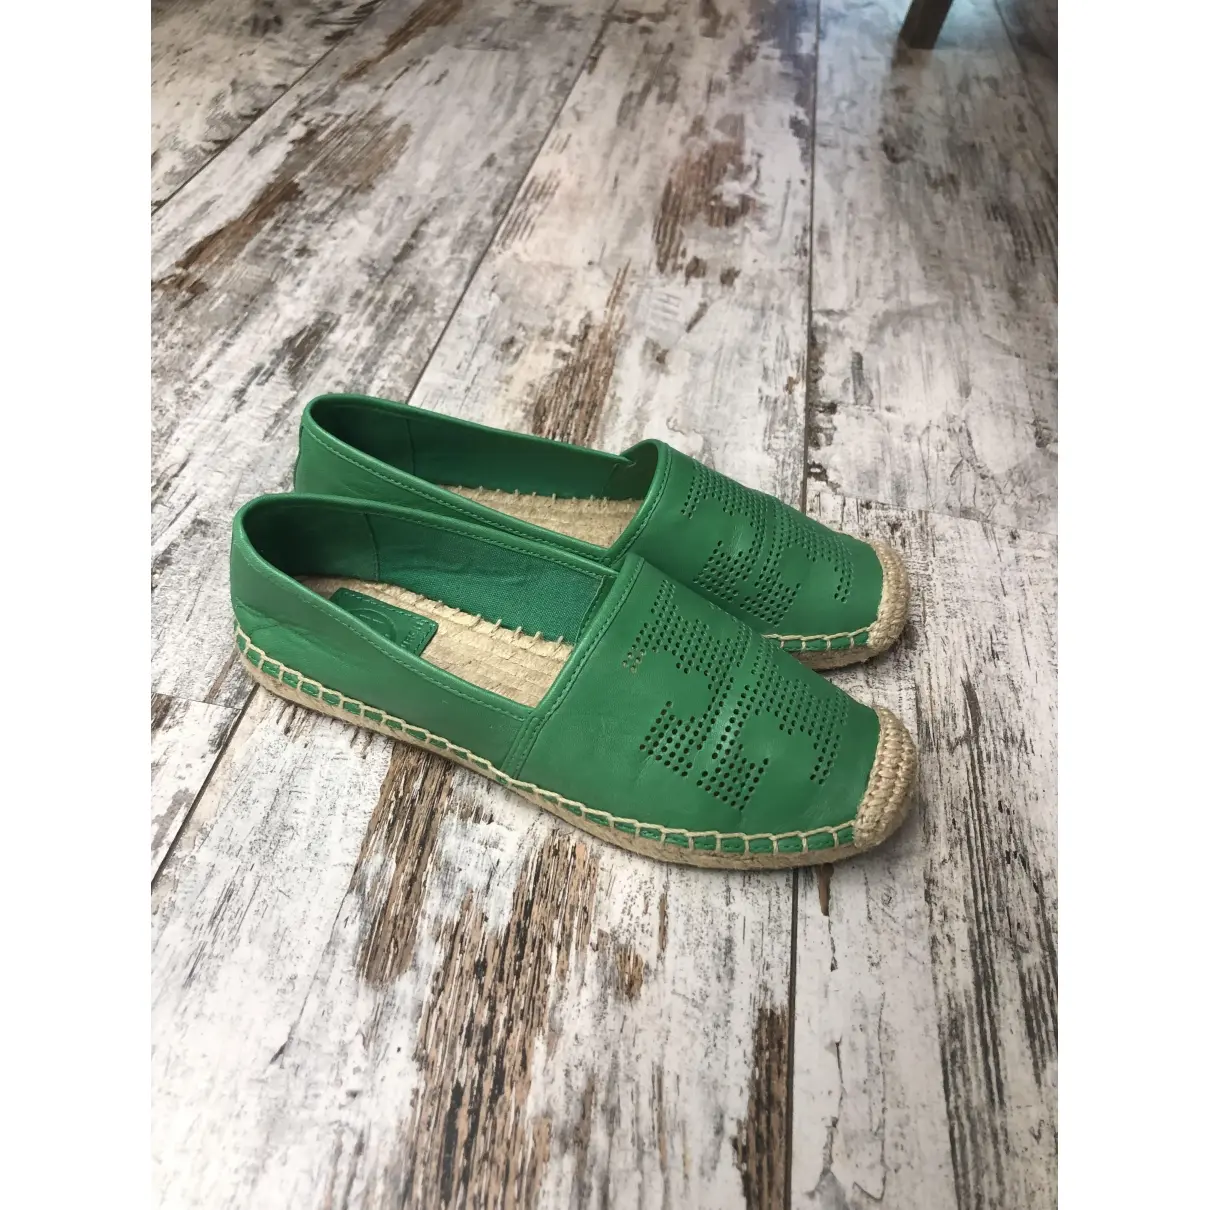 Buy Tory Burch Leather espadrilles online